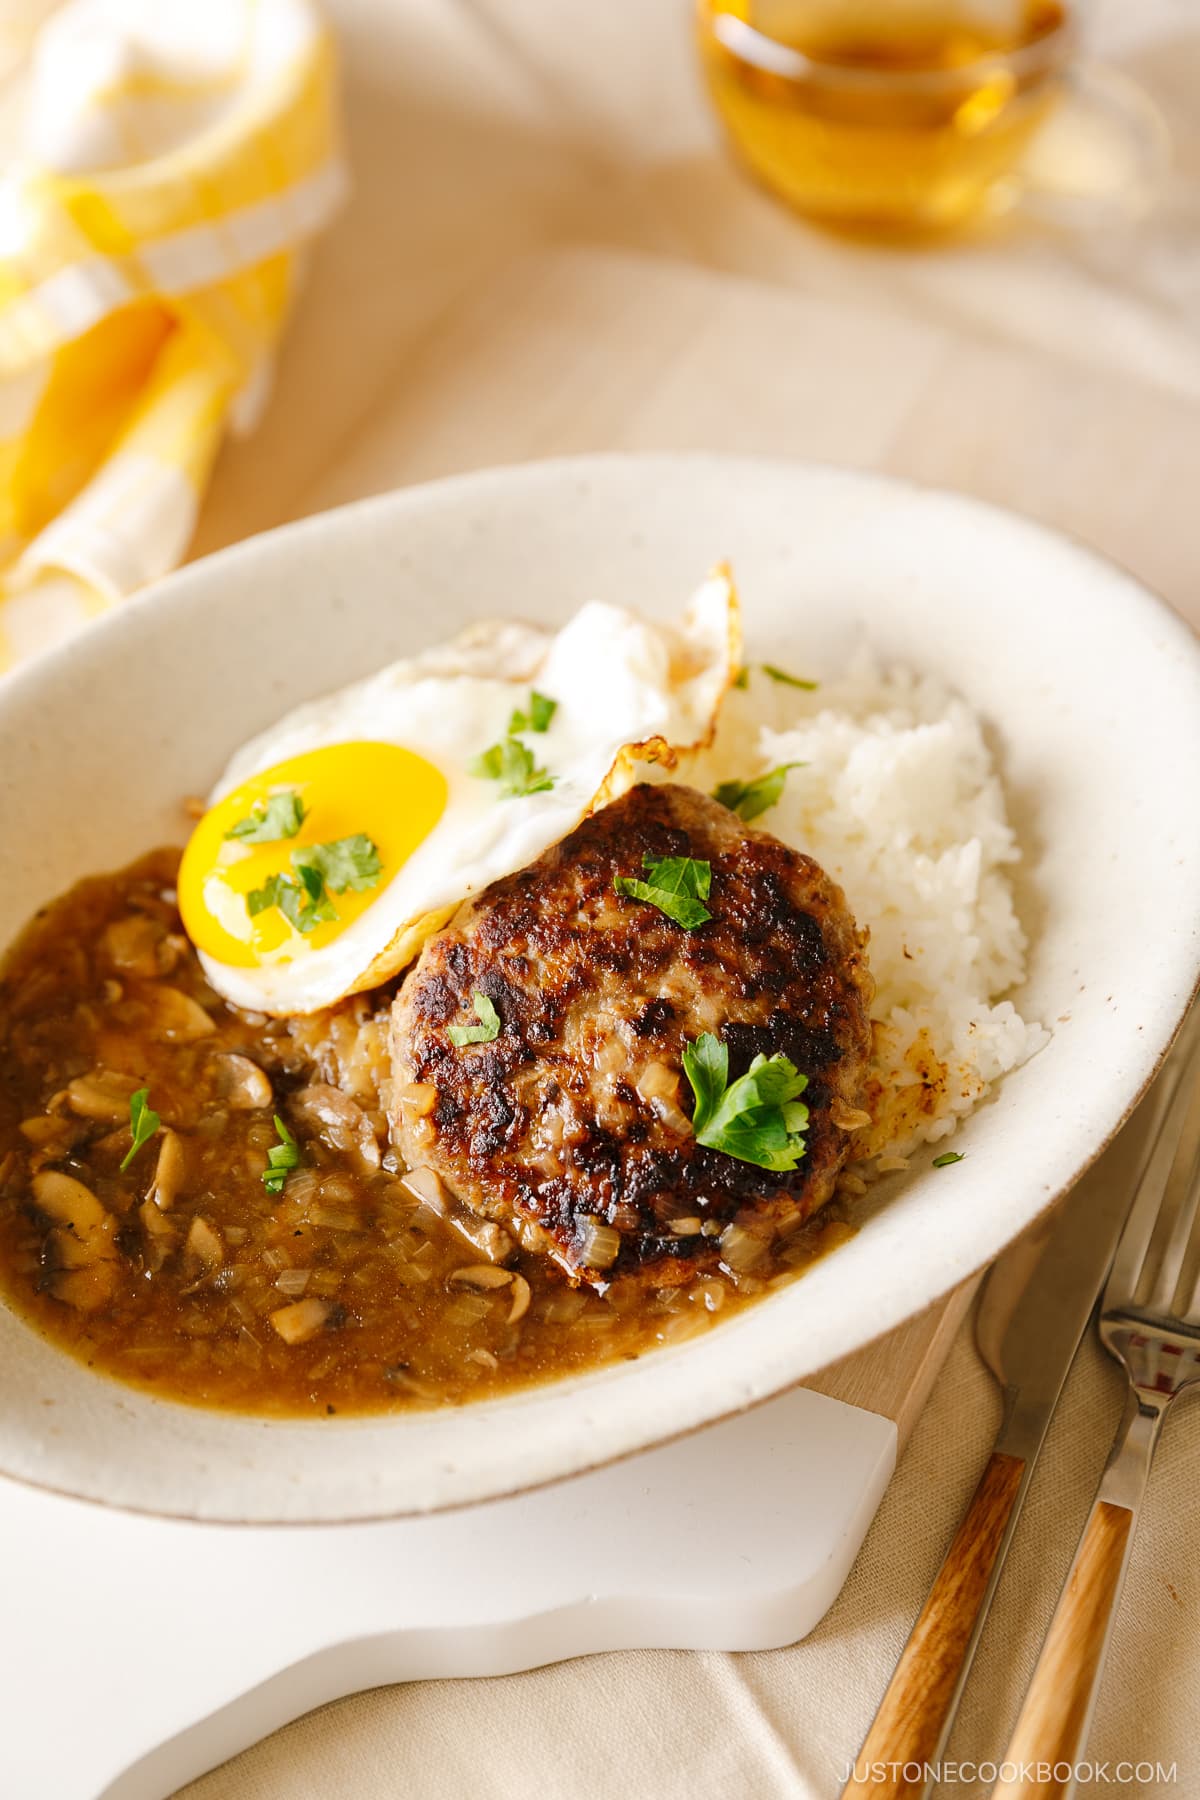 An oval dish containing Hawaiian dish called Loco Moco, consisting of hamburger steak, beef gravy, and fried egg over the steamed rice.